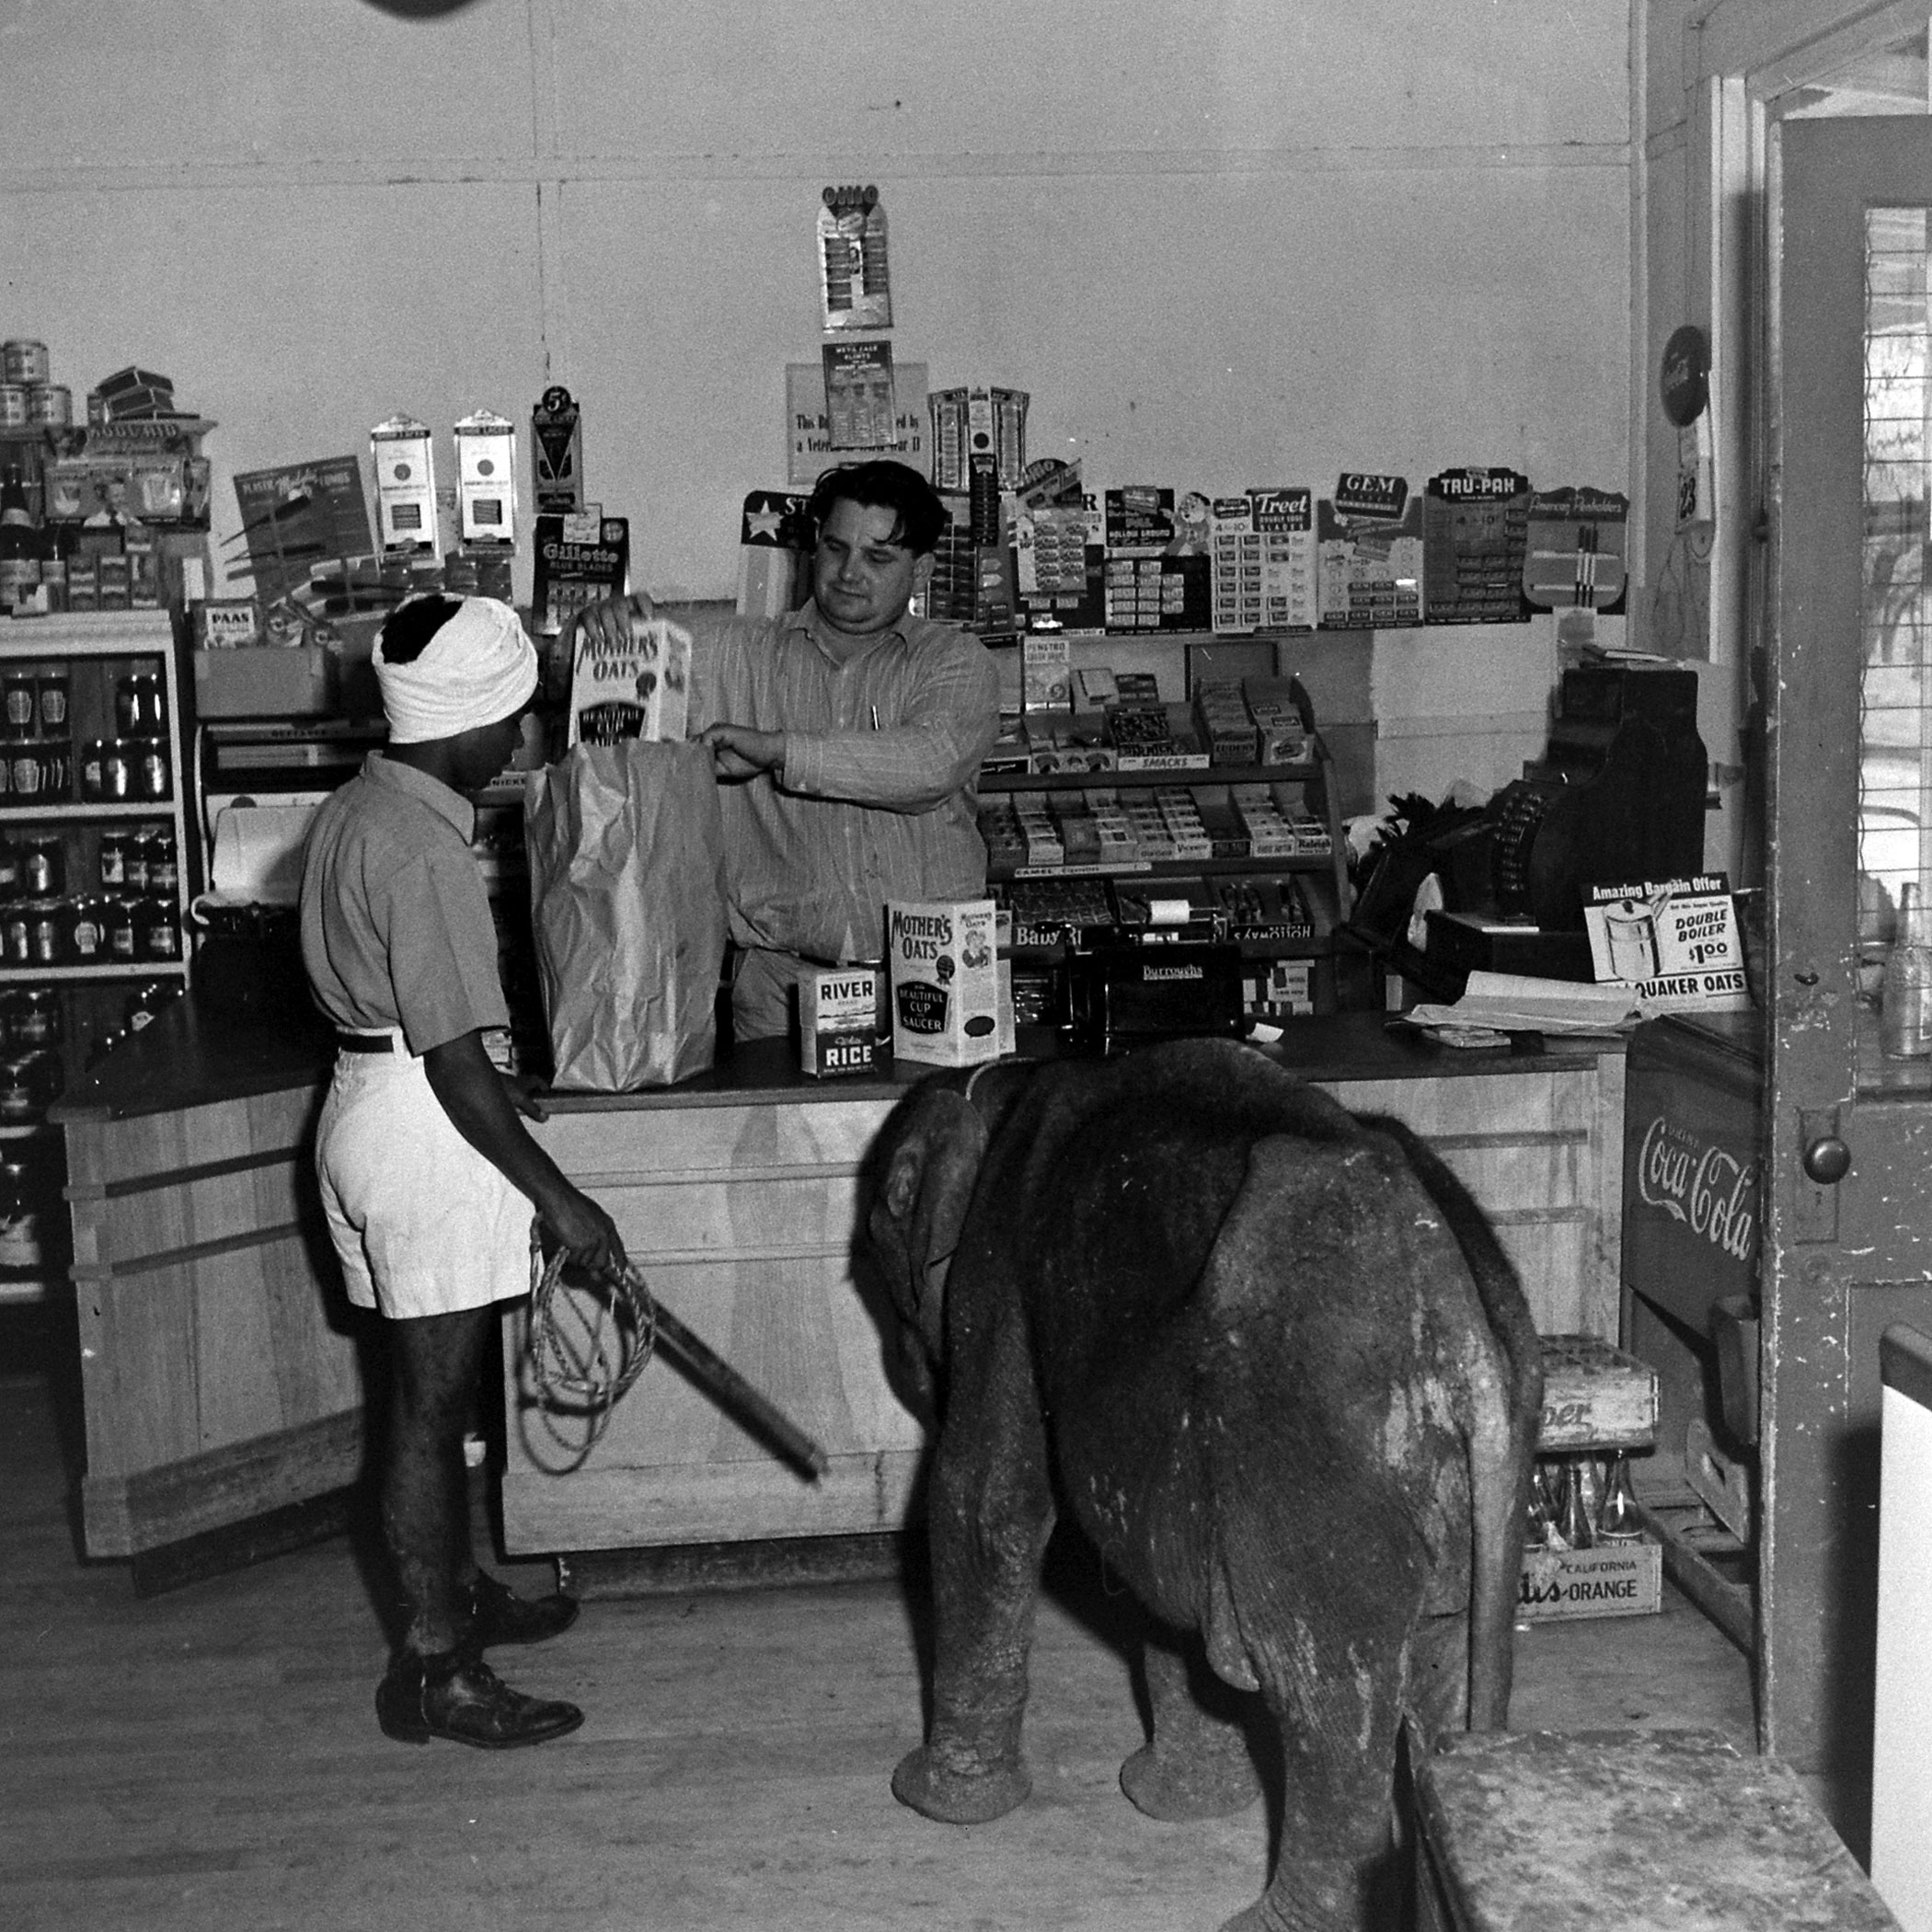 "Butch" the baby elephant shopping with her keeper, Singh.